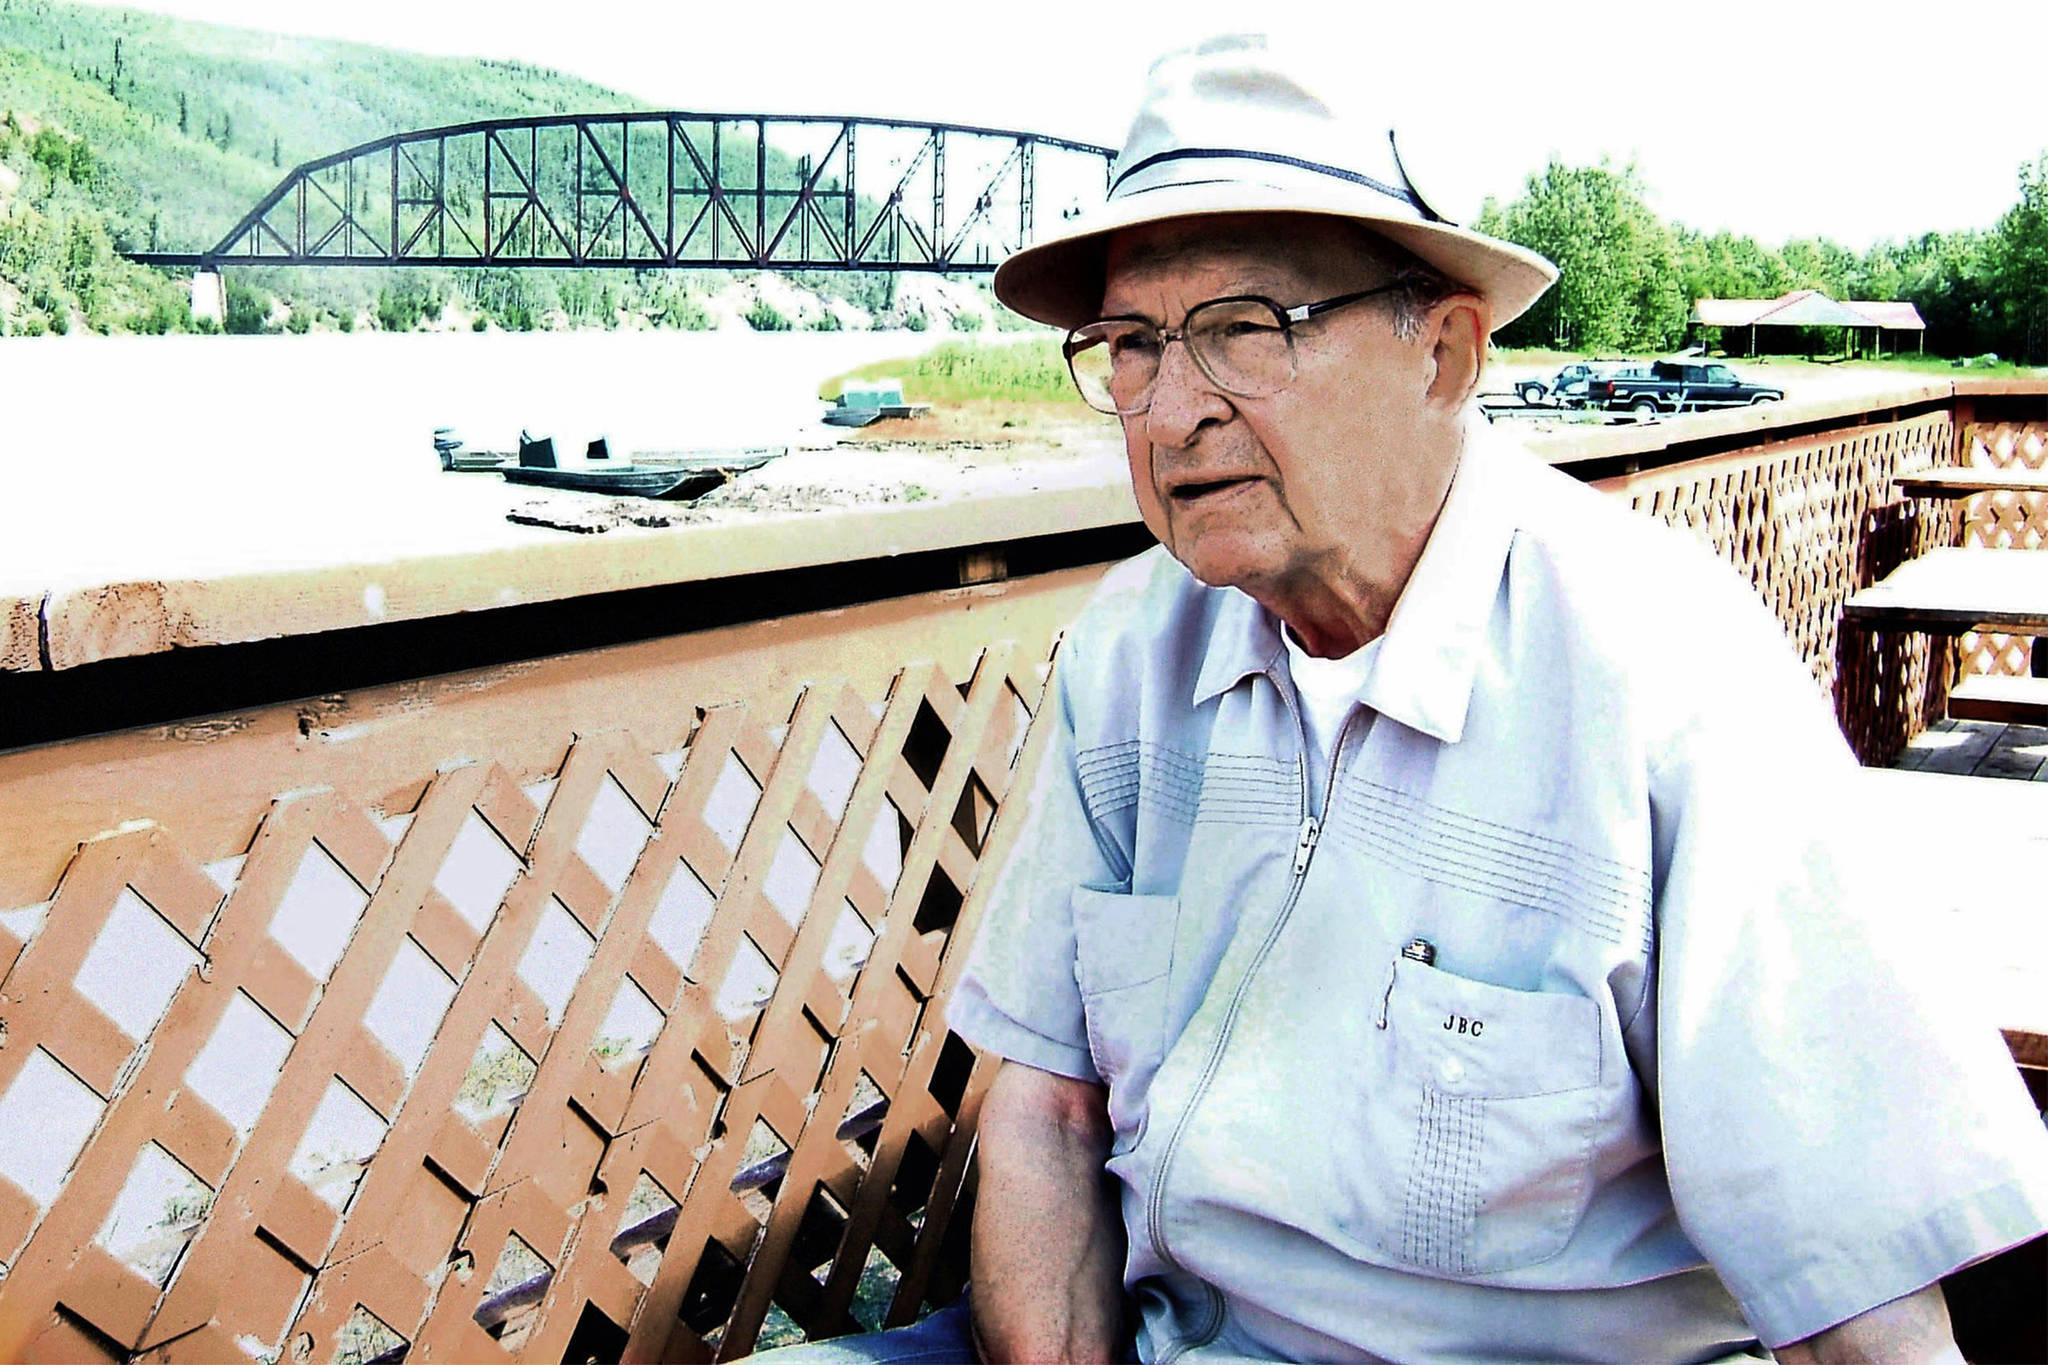 In this June 16, 2005 photo, Jack Coghill sits by the Tanana River in Nenana, Alaska. One of the last remaining members of the Alaska constitutional convention, former Lt. Gov. Jack Coghill died Wednesday, Feb. 13, 2019, at age 93 in North Pole. (Dan Joling | Associated Press File)